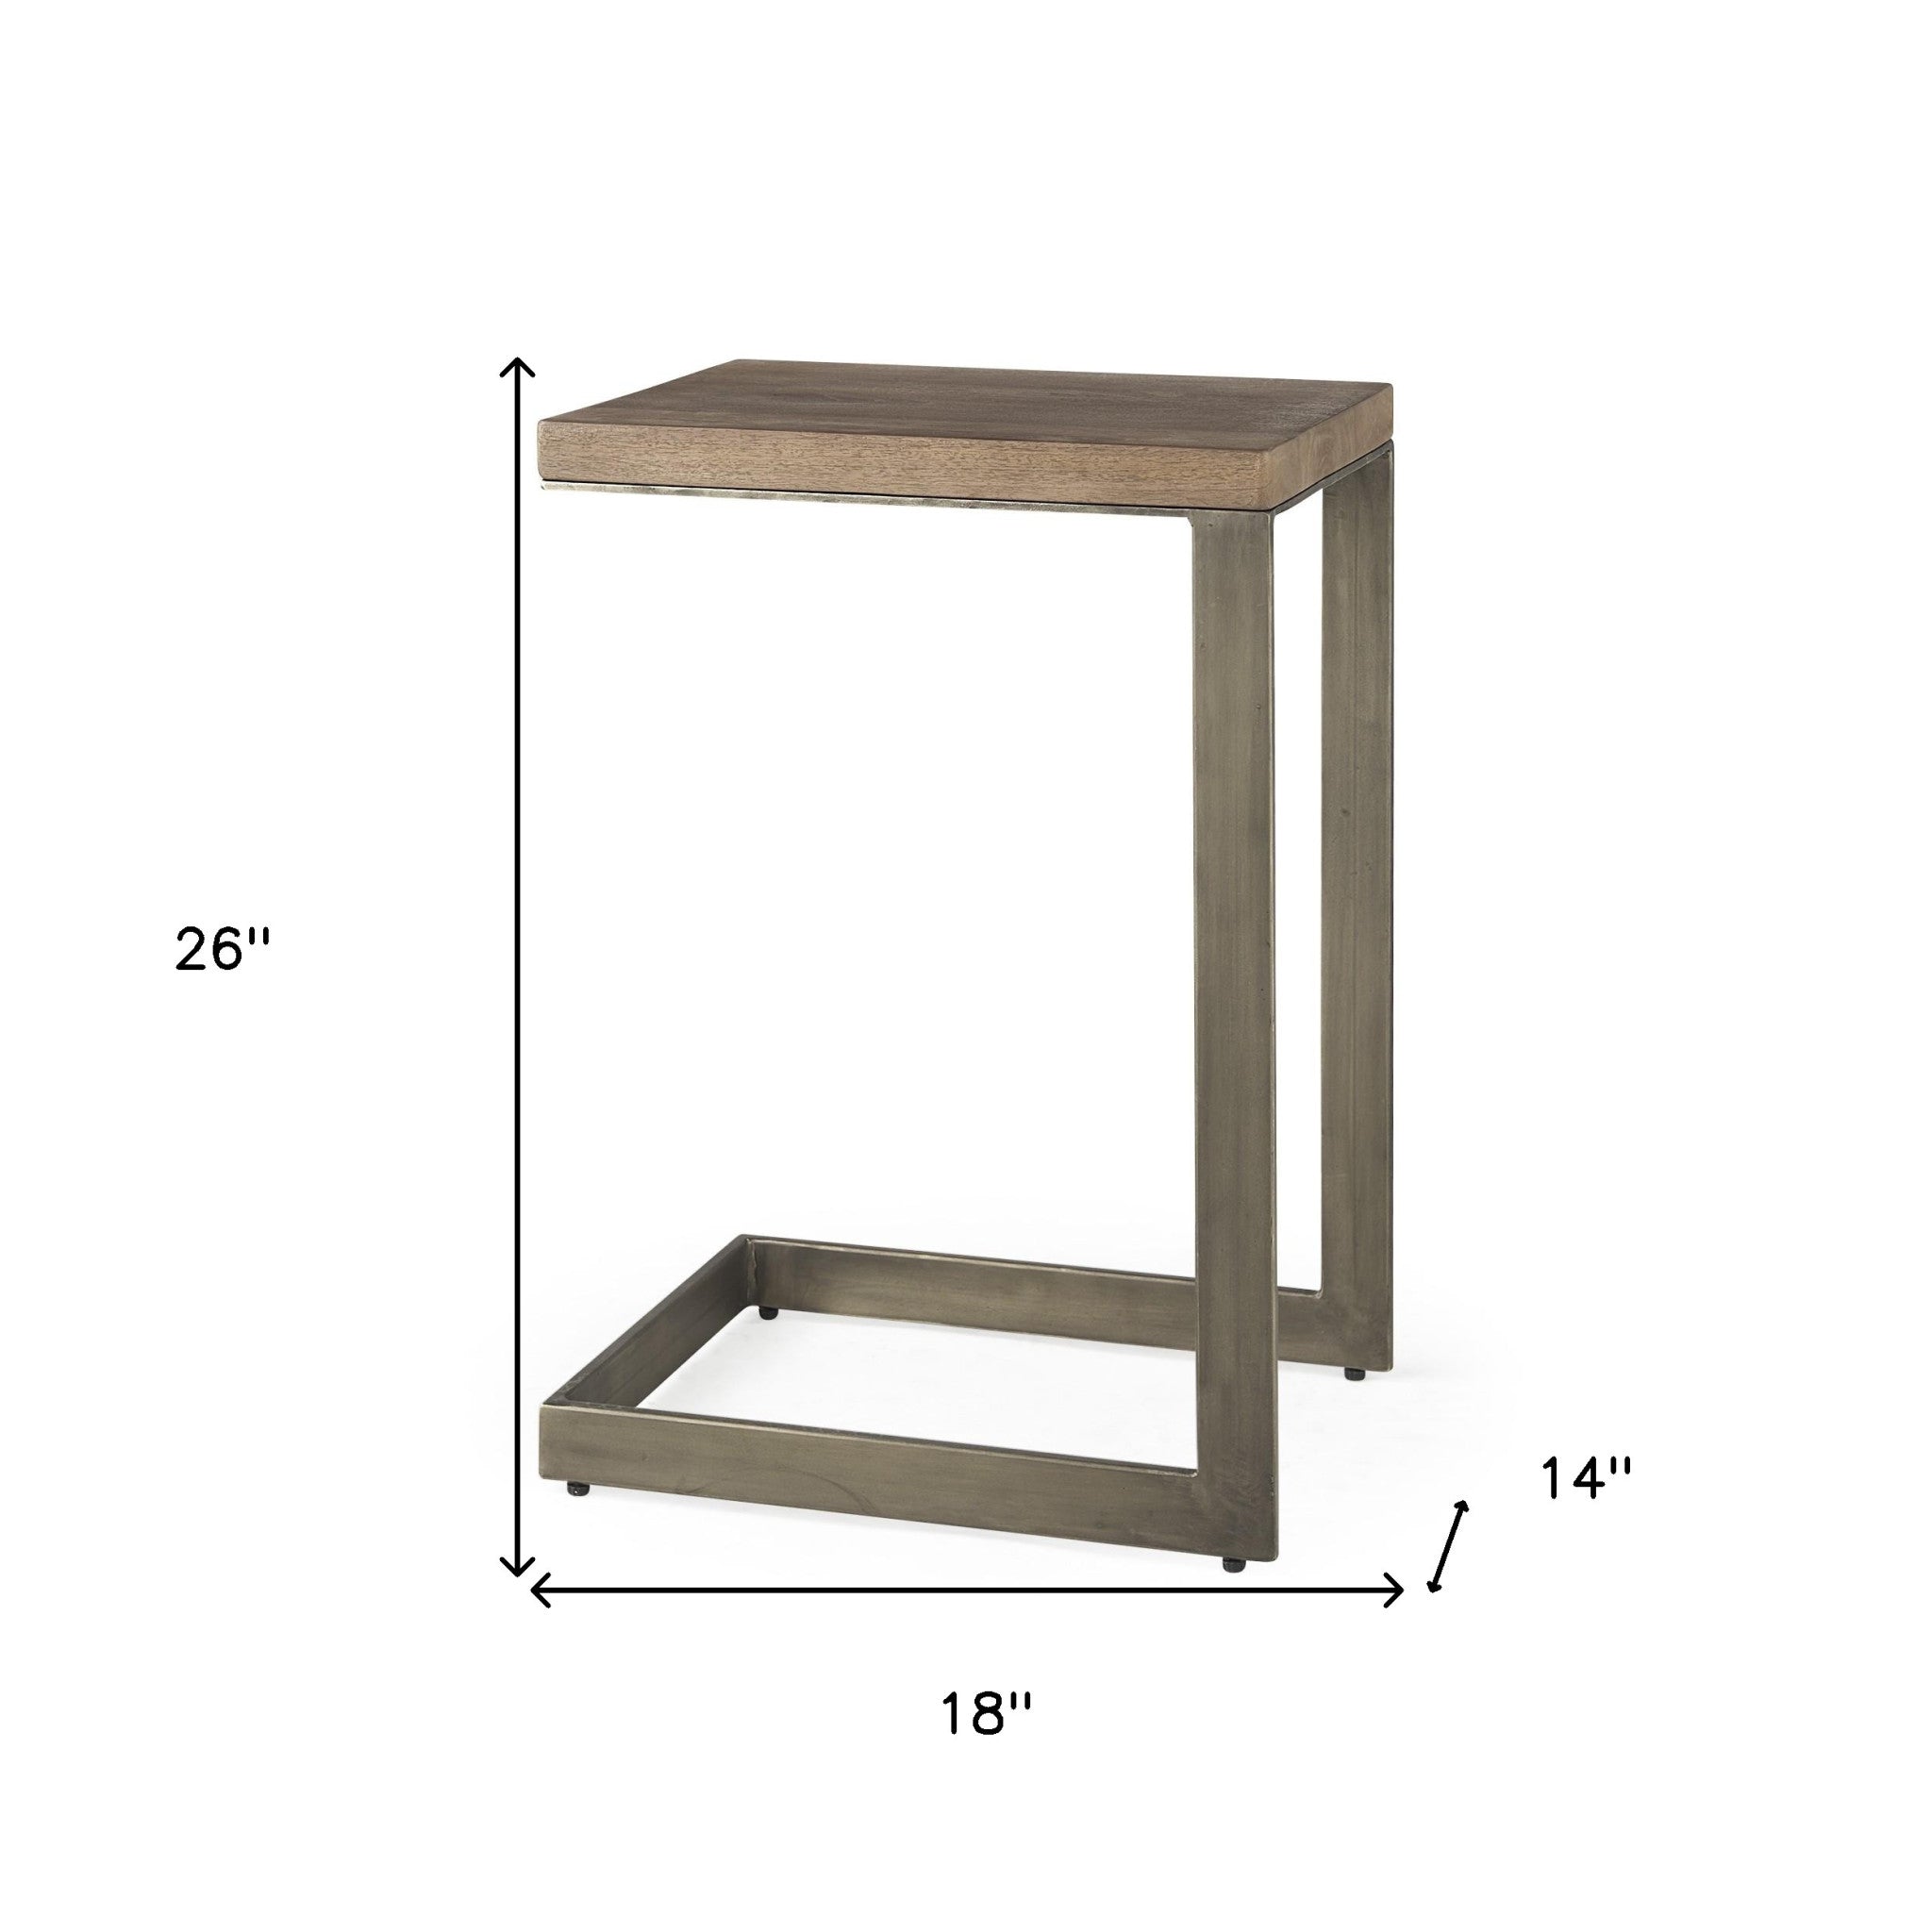 26" Brown Solid and Manufactured Wood Square End Table